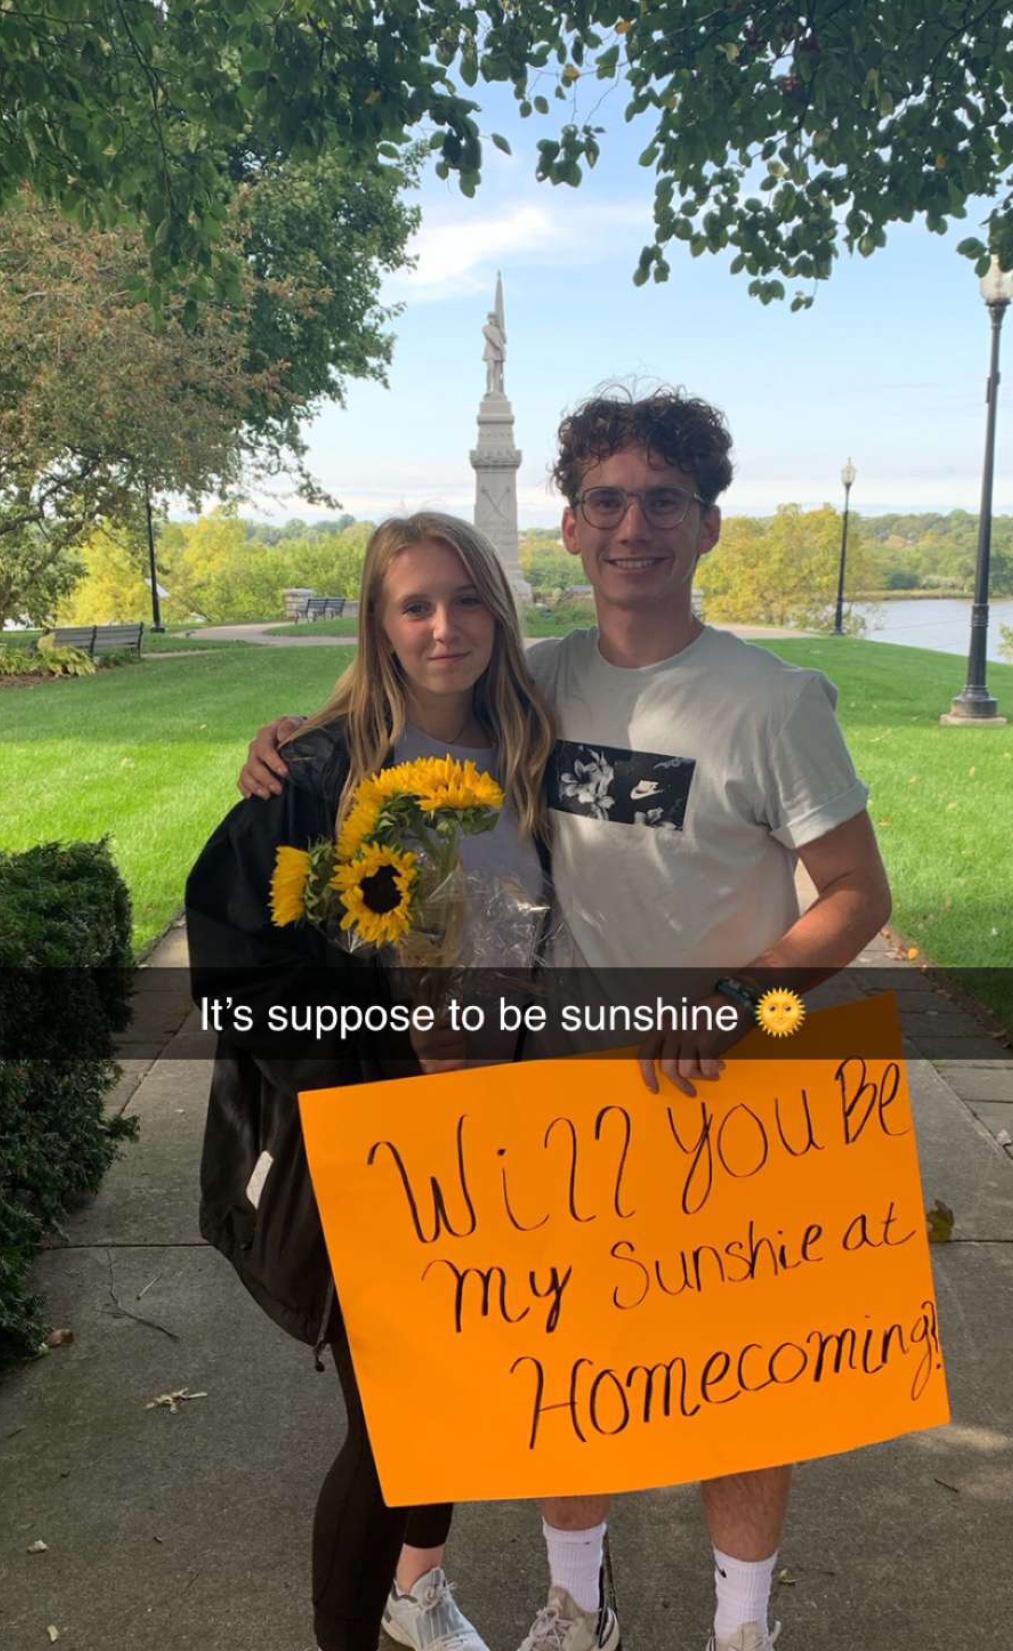 "Will you be my sunshine at Homecoming?"